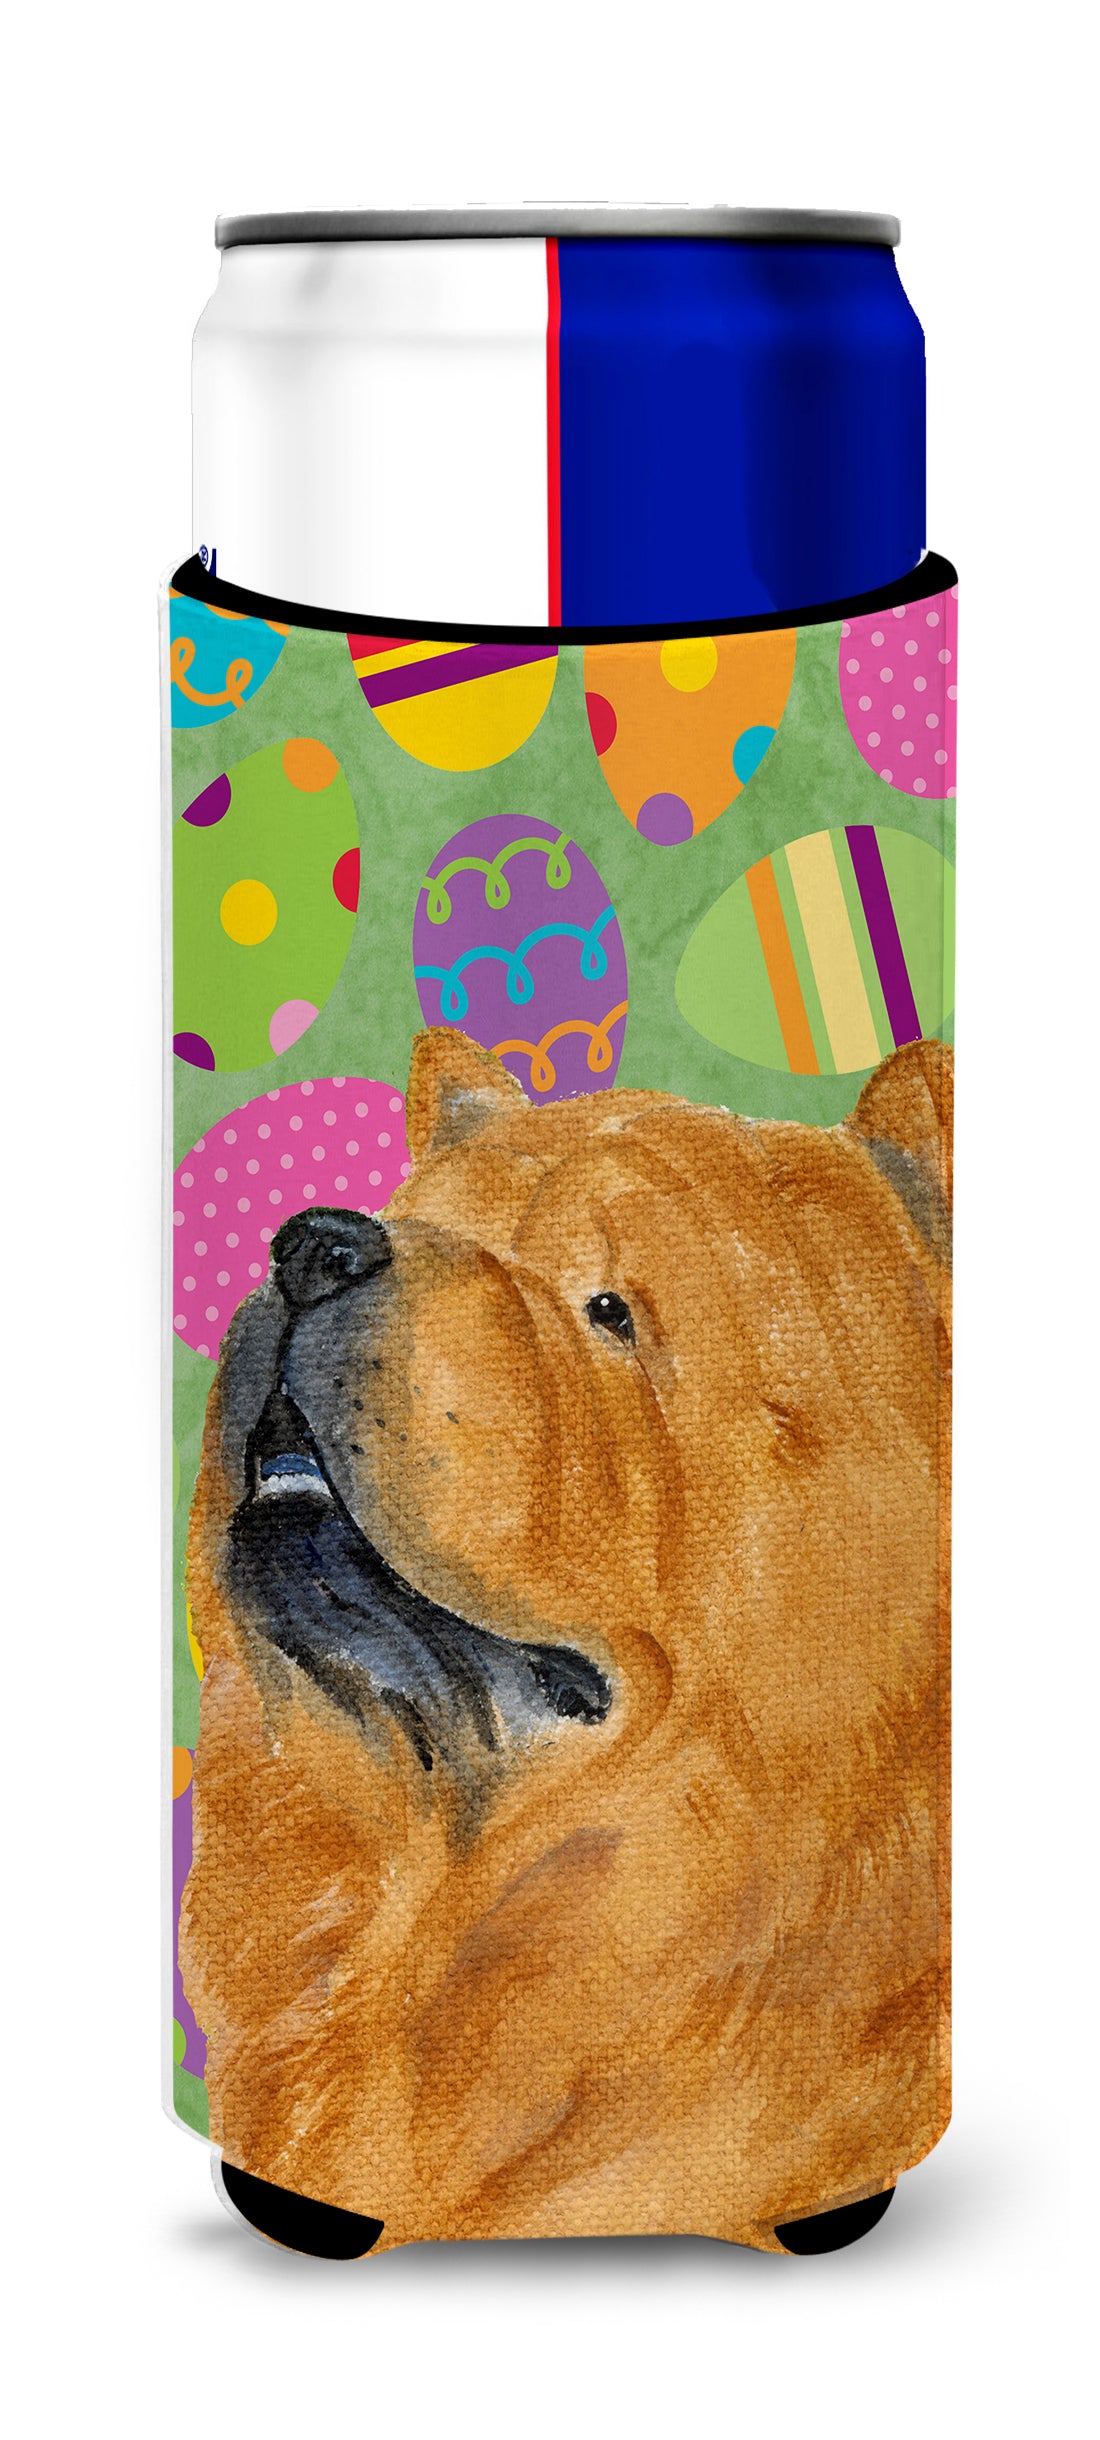 Chow Chow Easter Eggtravaganza Ultra Beverage Insulators for slim cans SS4847MUK.